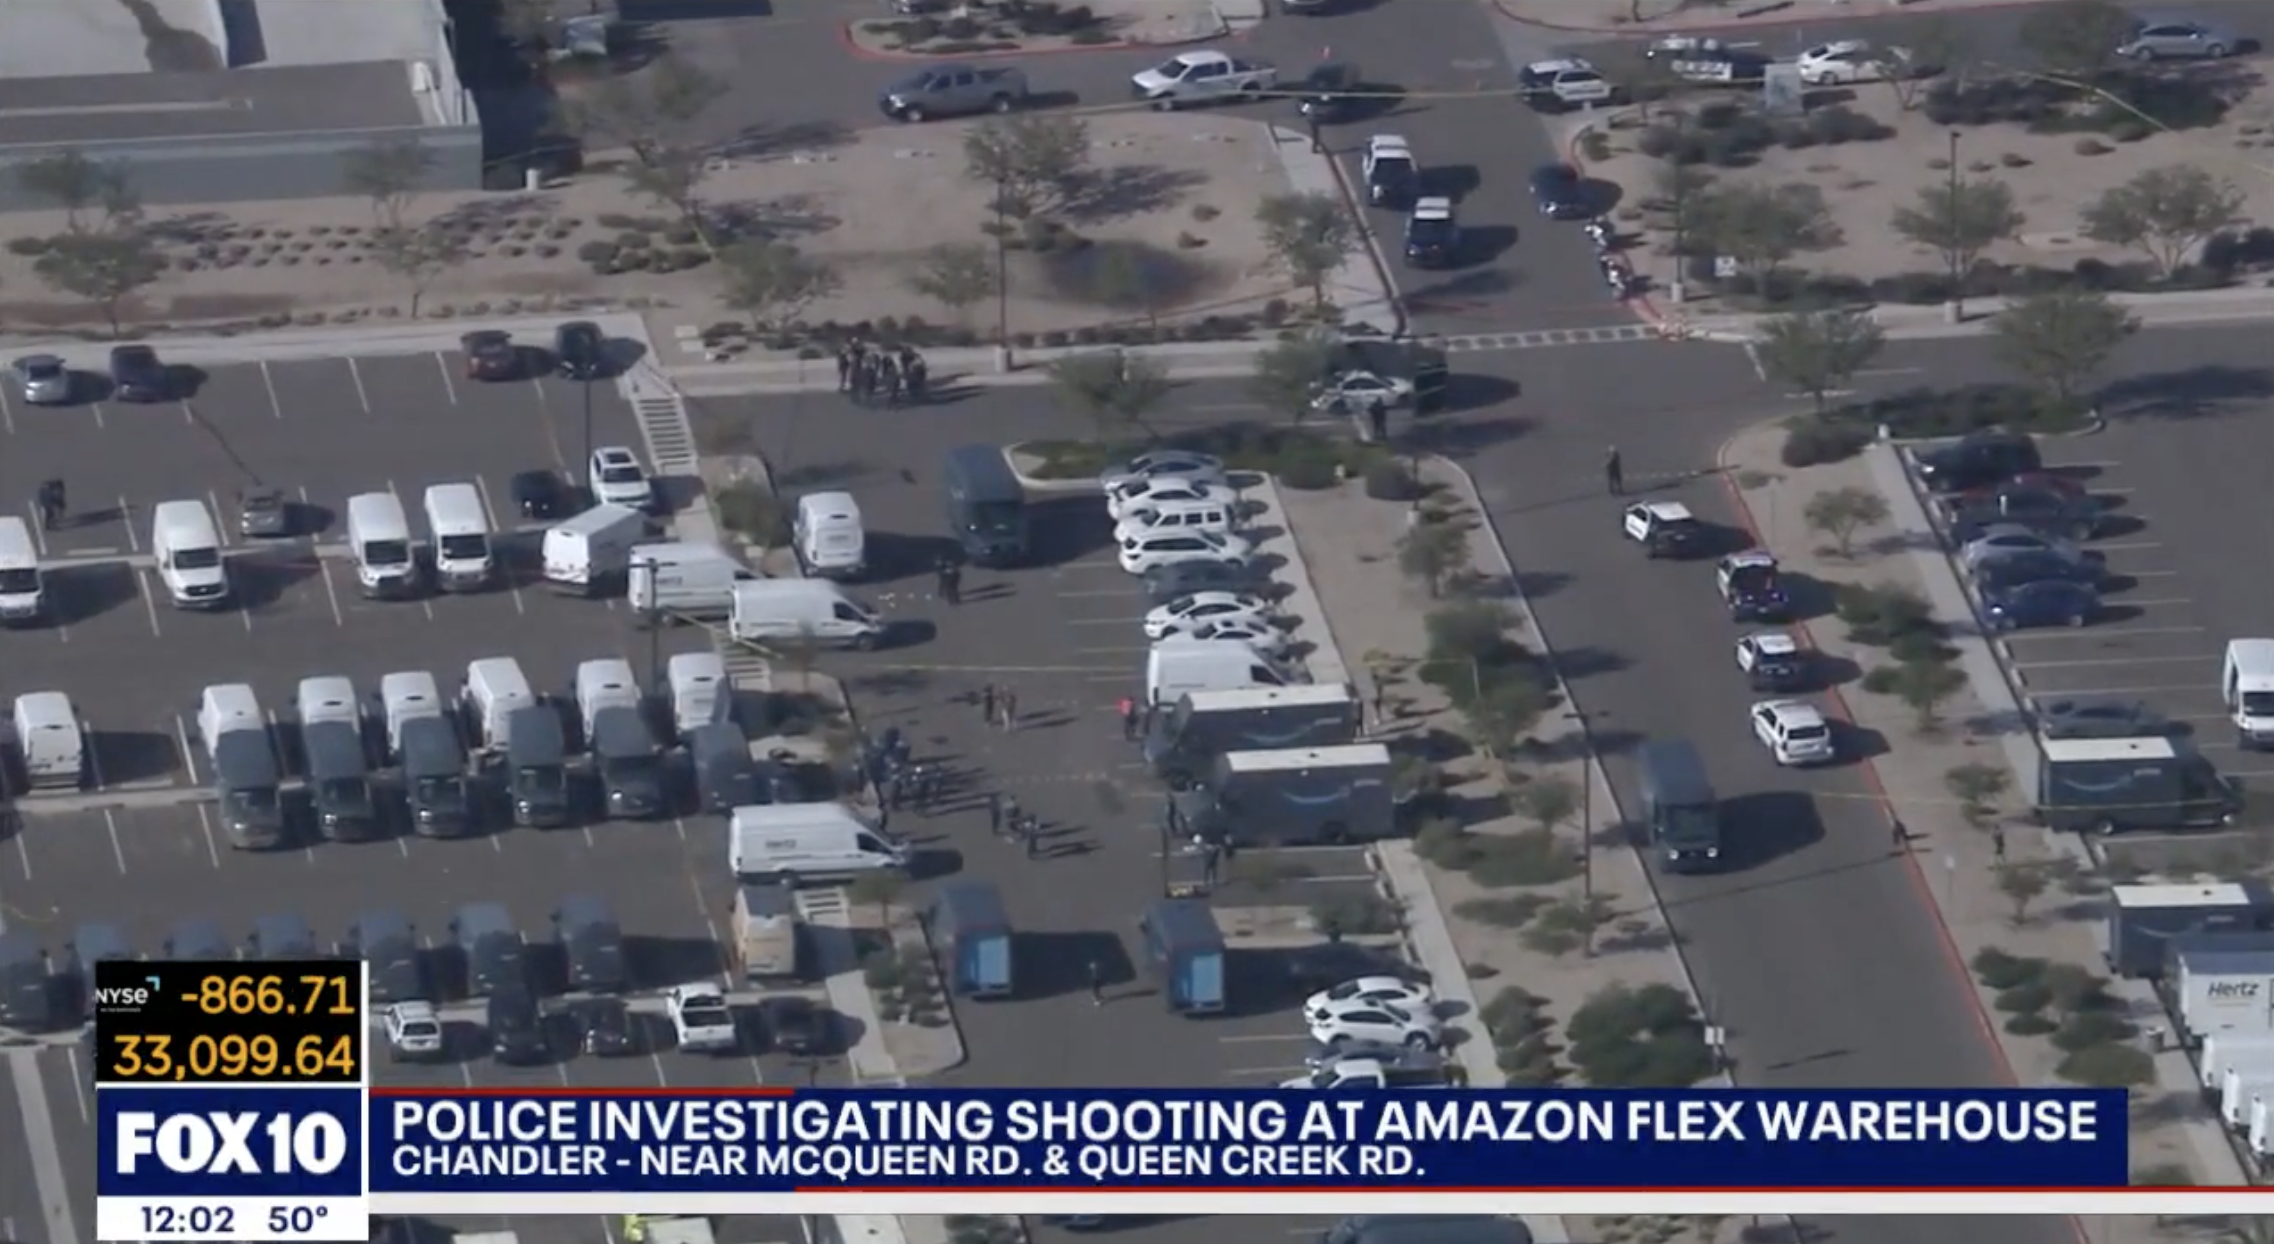 “Good Samaritan” Armed Amazon employee stops shooter who opened fire at Arizona facility, police say “likely preventing further bloodshed”